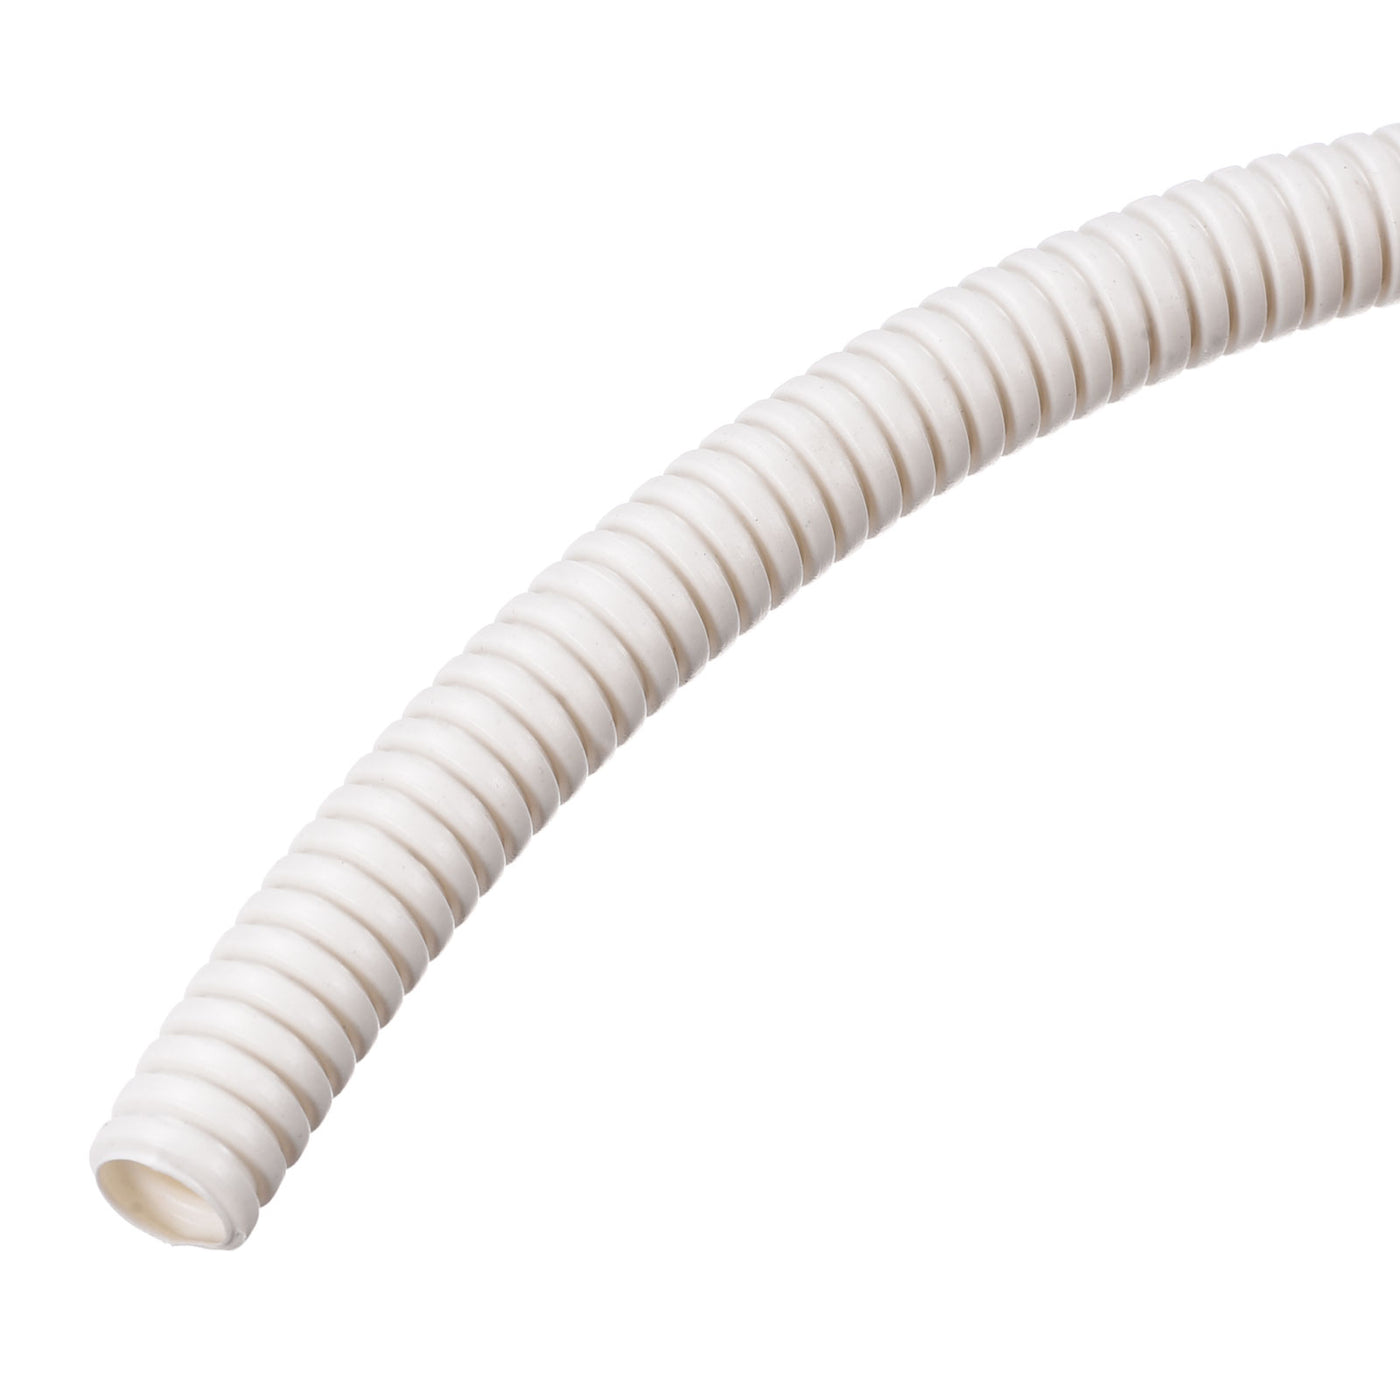 Harfington Wire Loom Tubing Corrugated Pipe Conduit, 16M/52.5ft Length 10x13mm White for Wire Cable